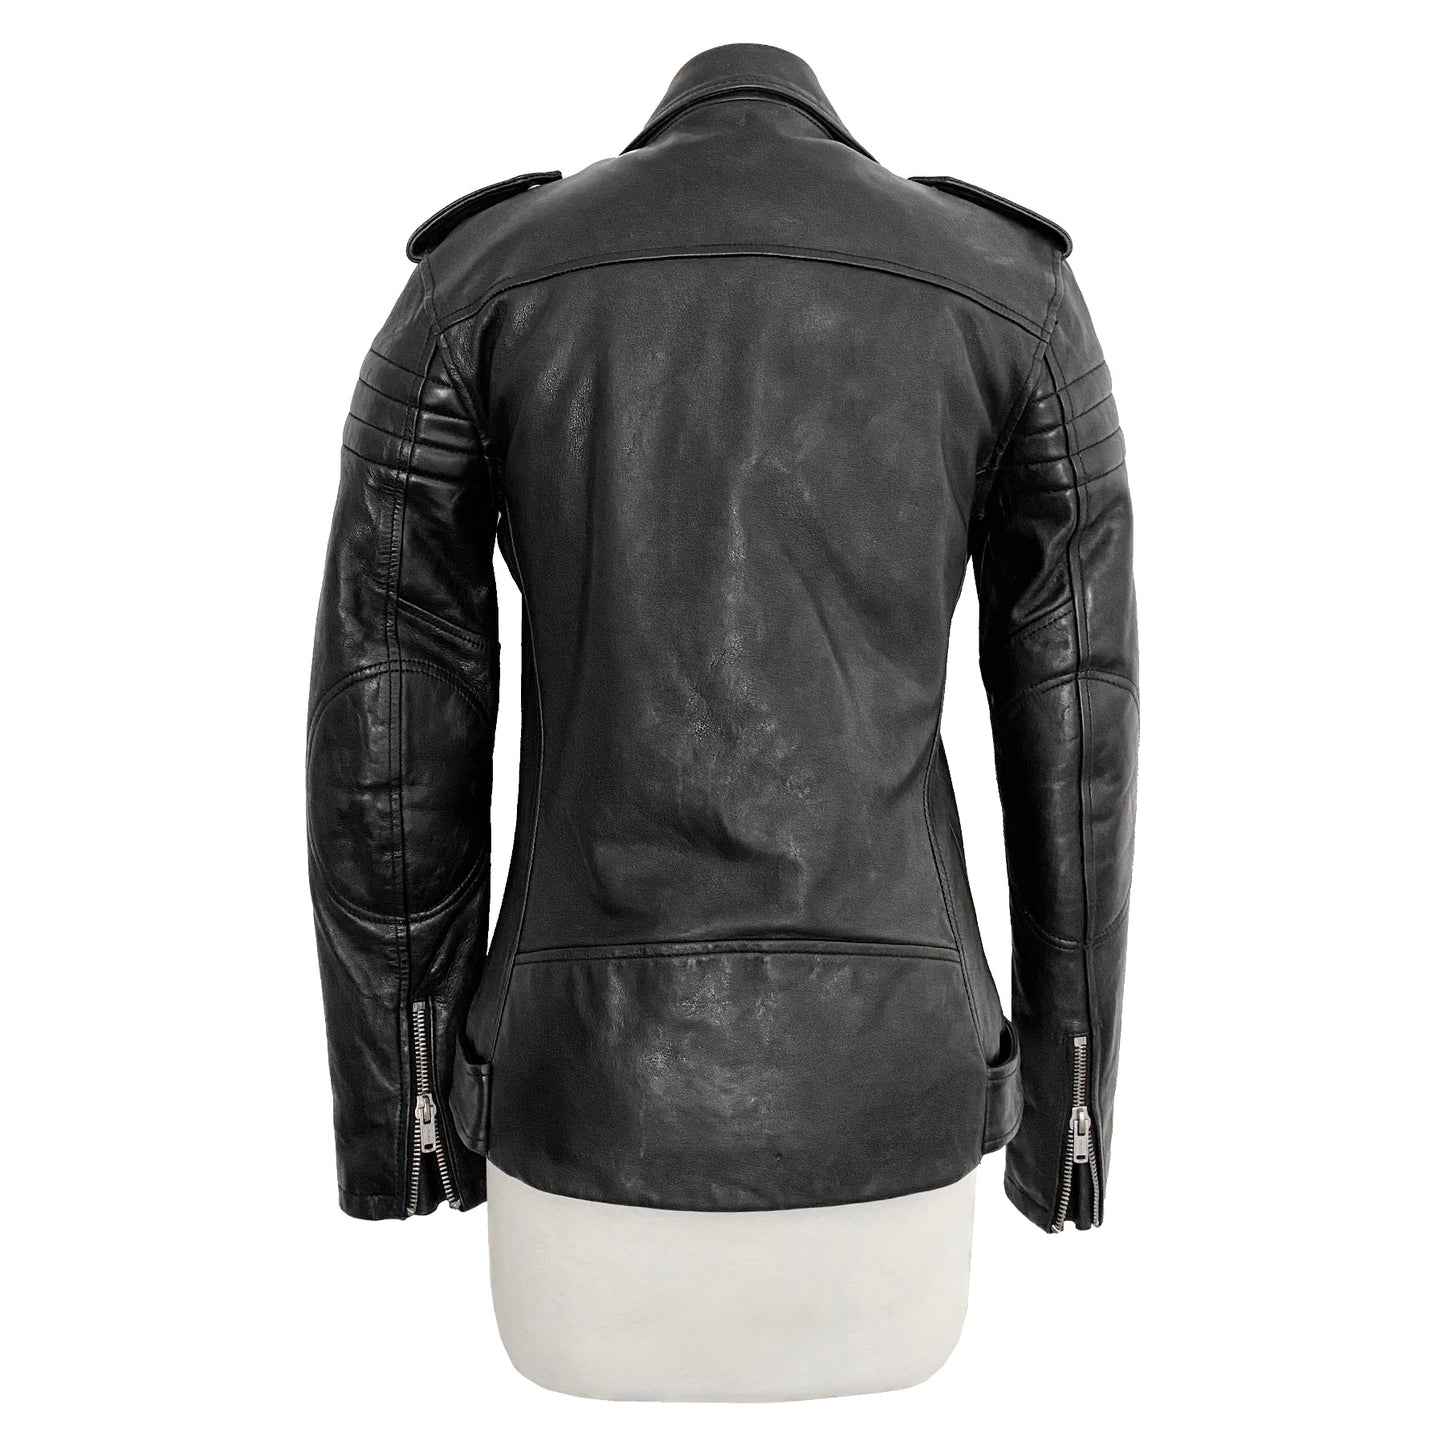 BLK DNM Motorcycle Black Belted Leather Jacket Size S